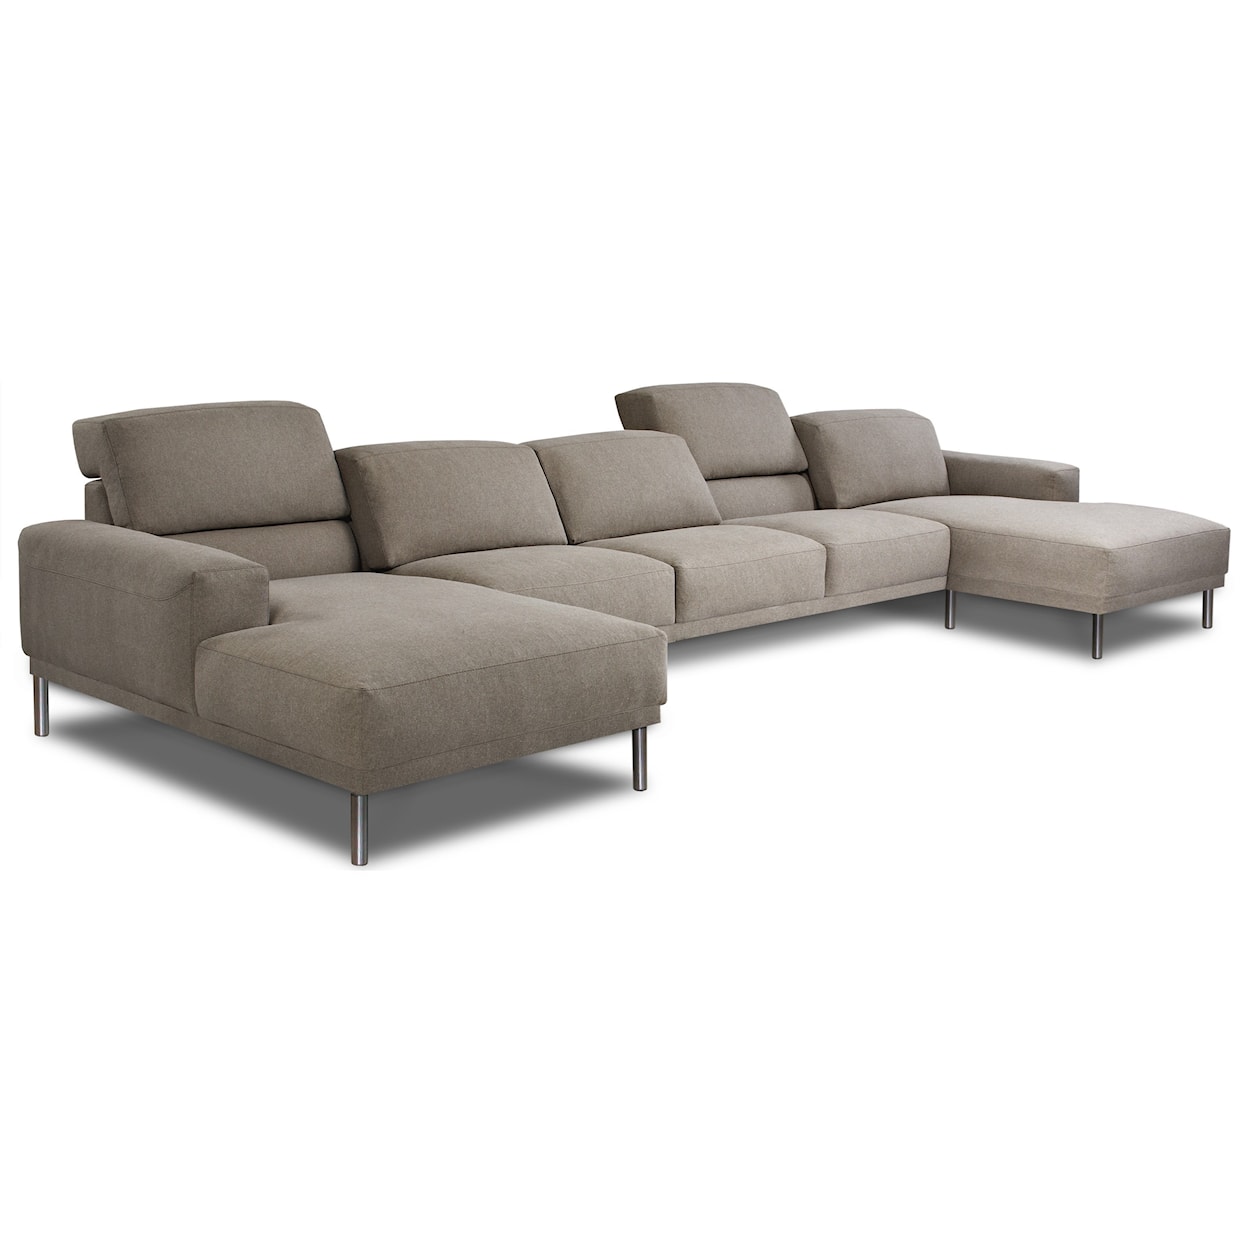 American Leather Meyer 5-Seat Chaise Sofa